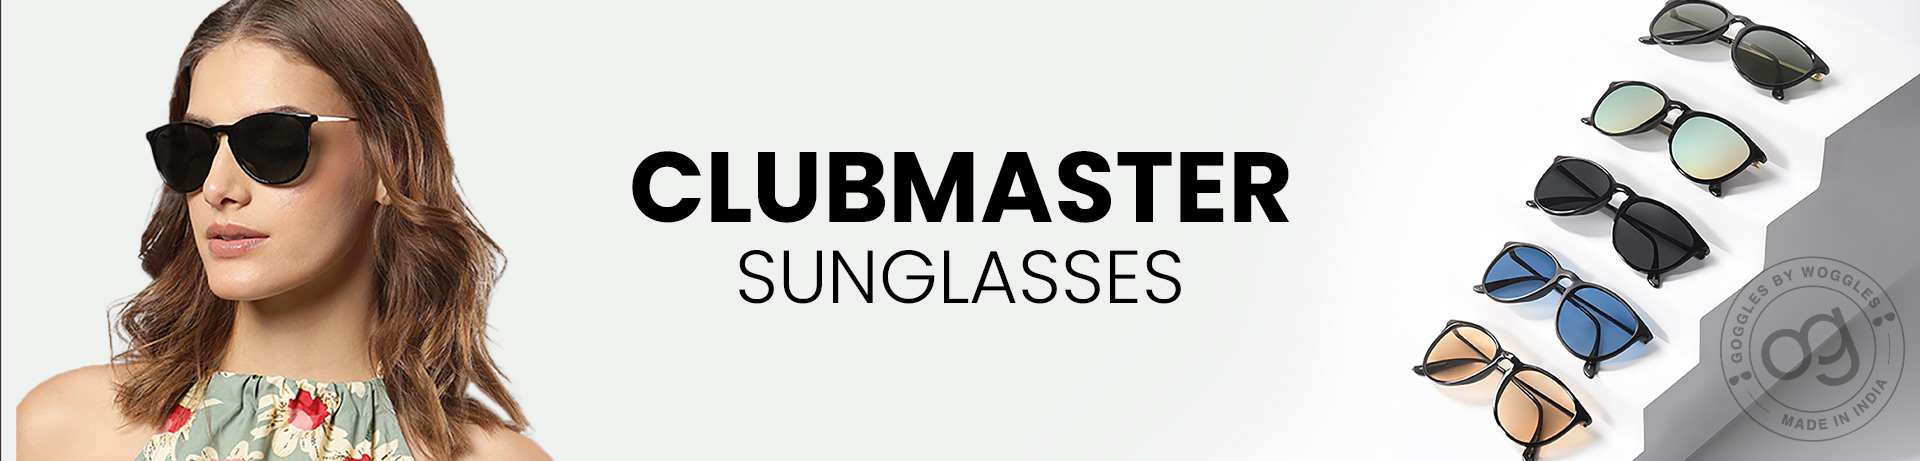 clubmaster sunglasses for women